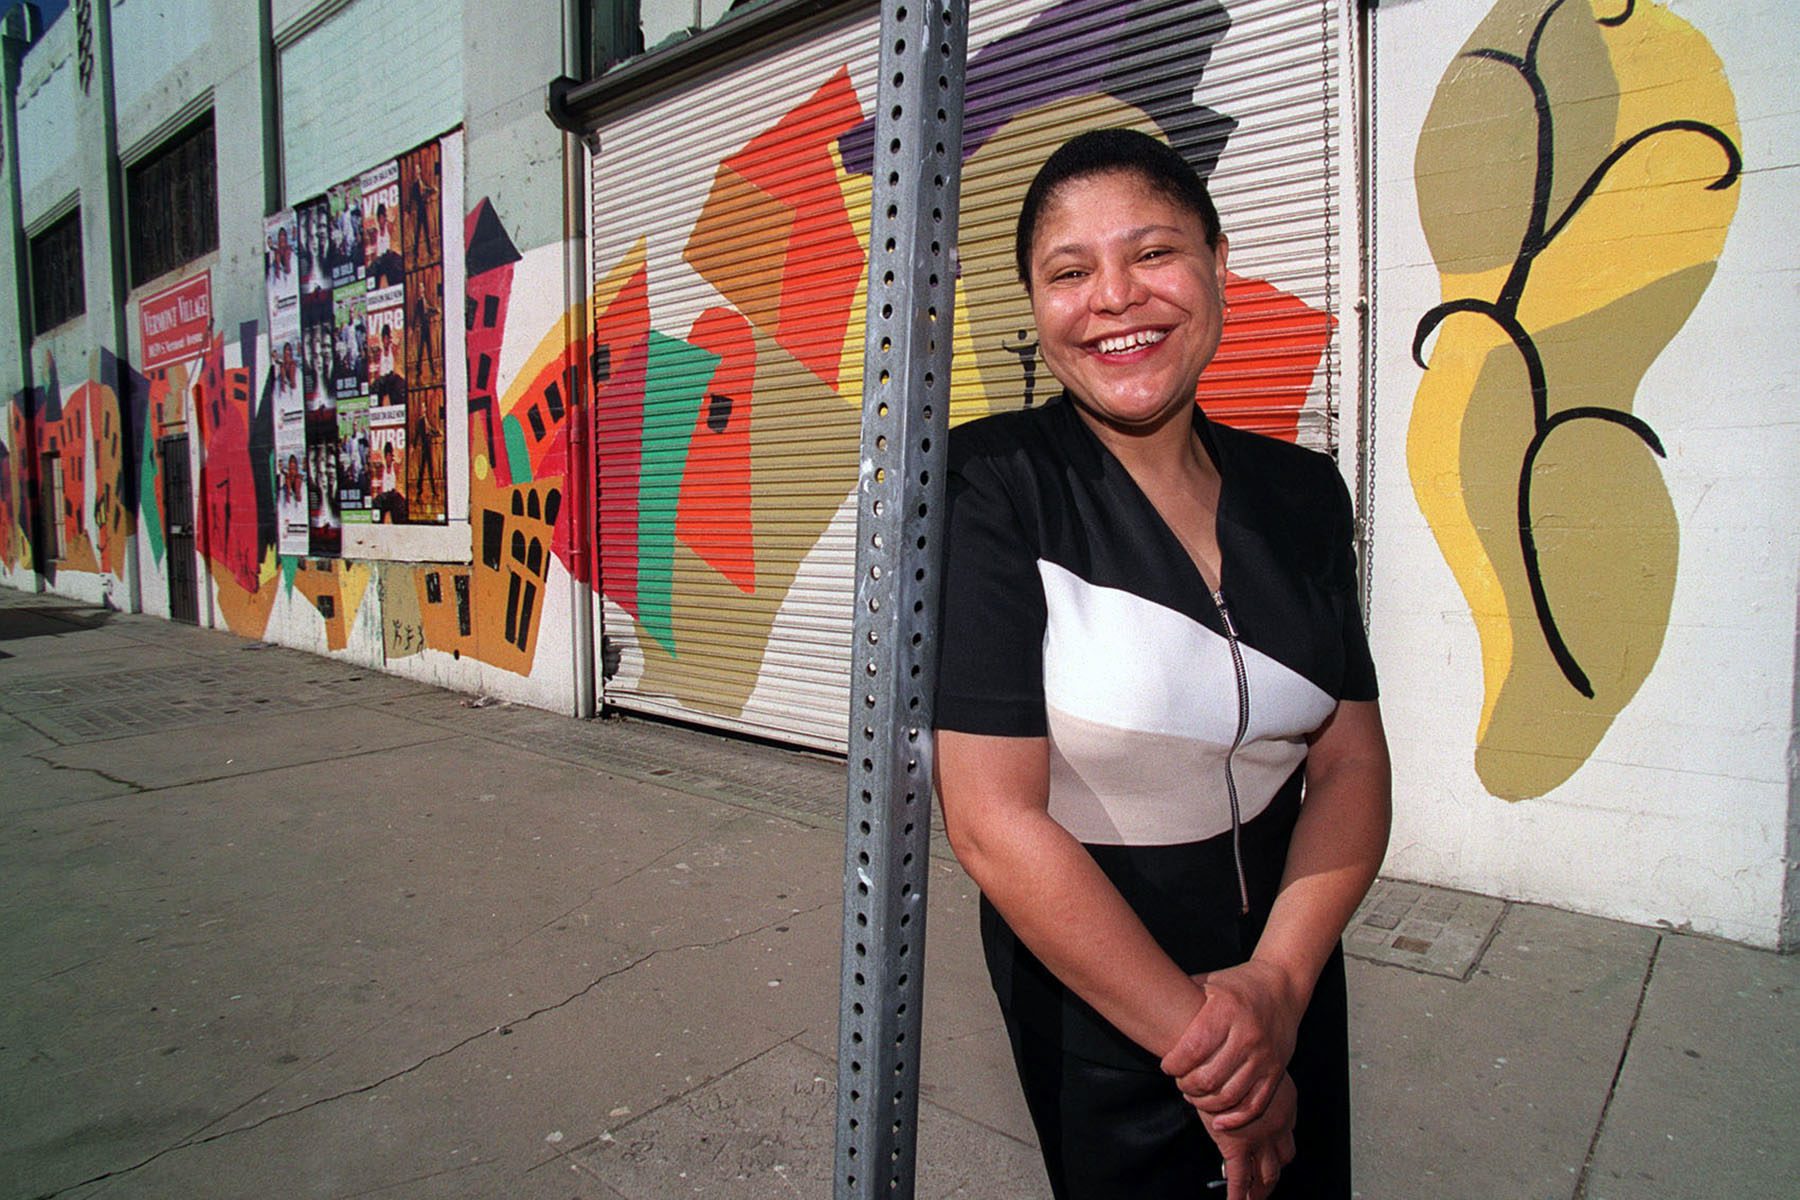 An image of Bass smiling on a Los Angeles street in front of a colorful mural, taken in the early 2000s.